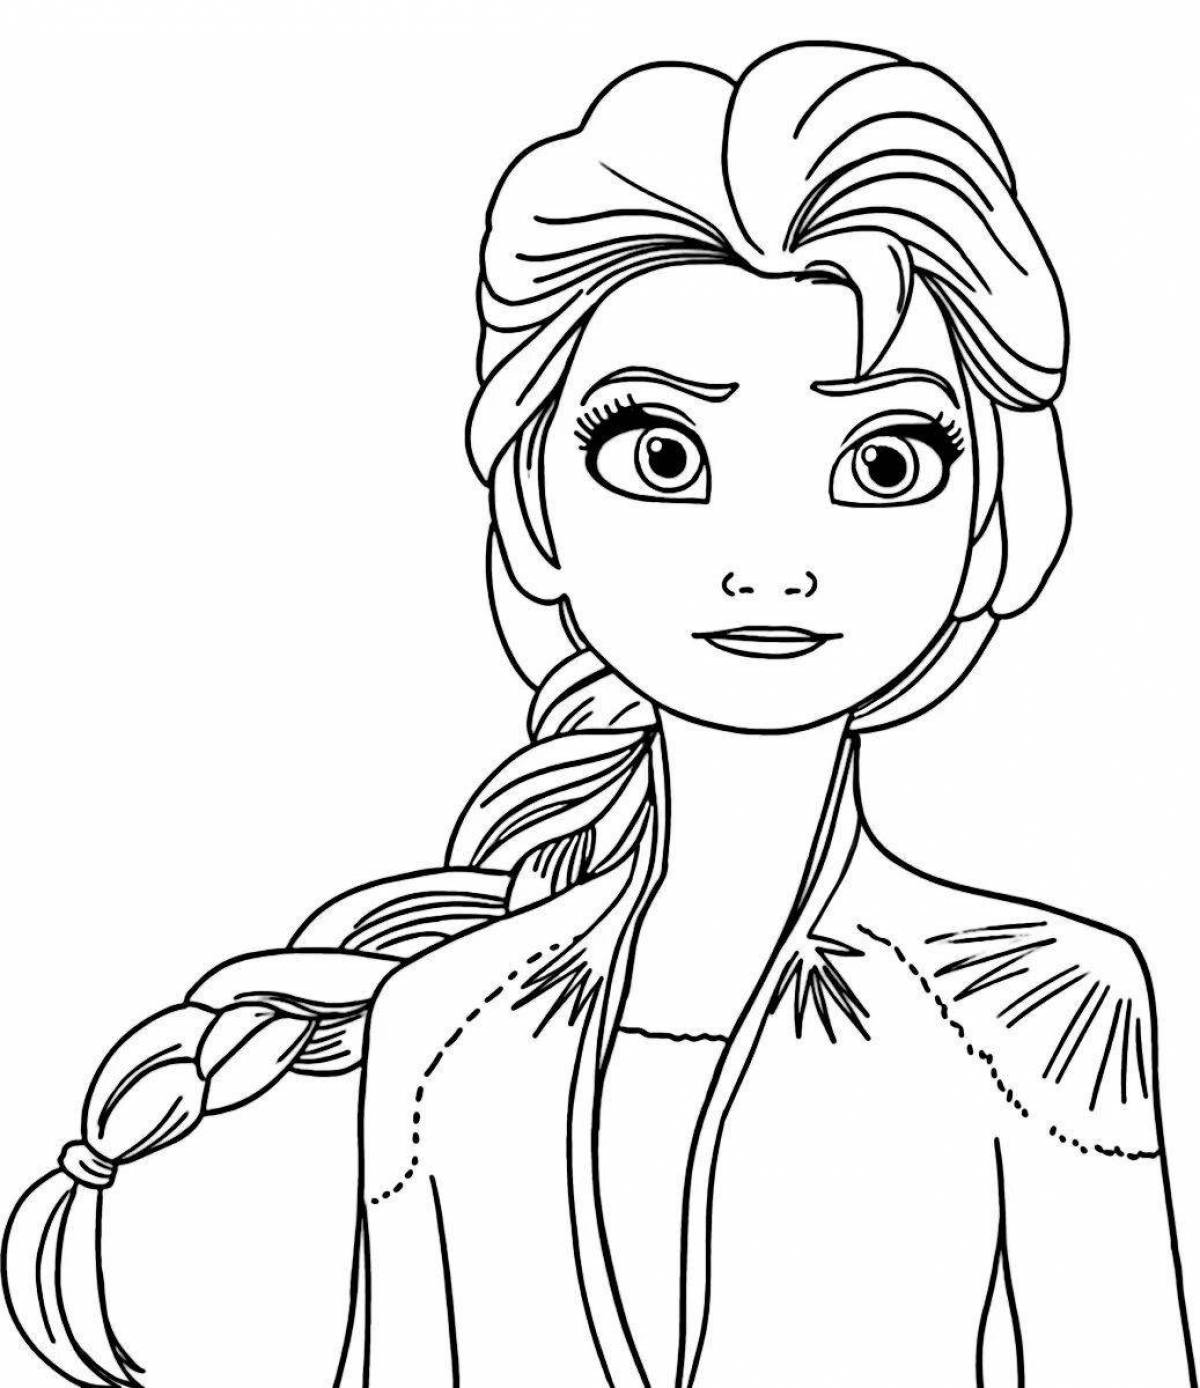 Awesome coloring pages for girls anna